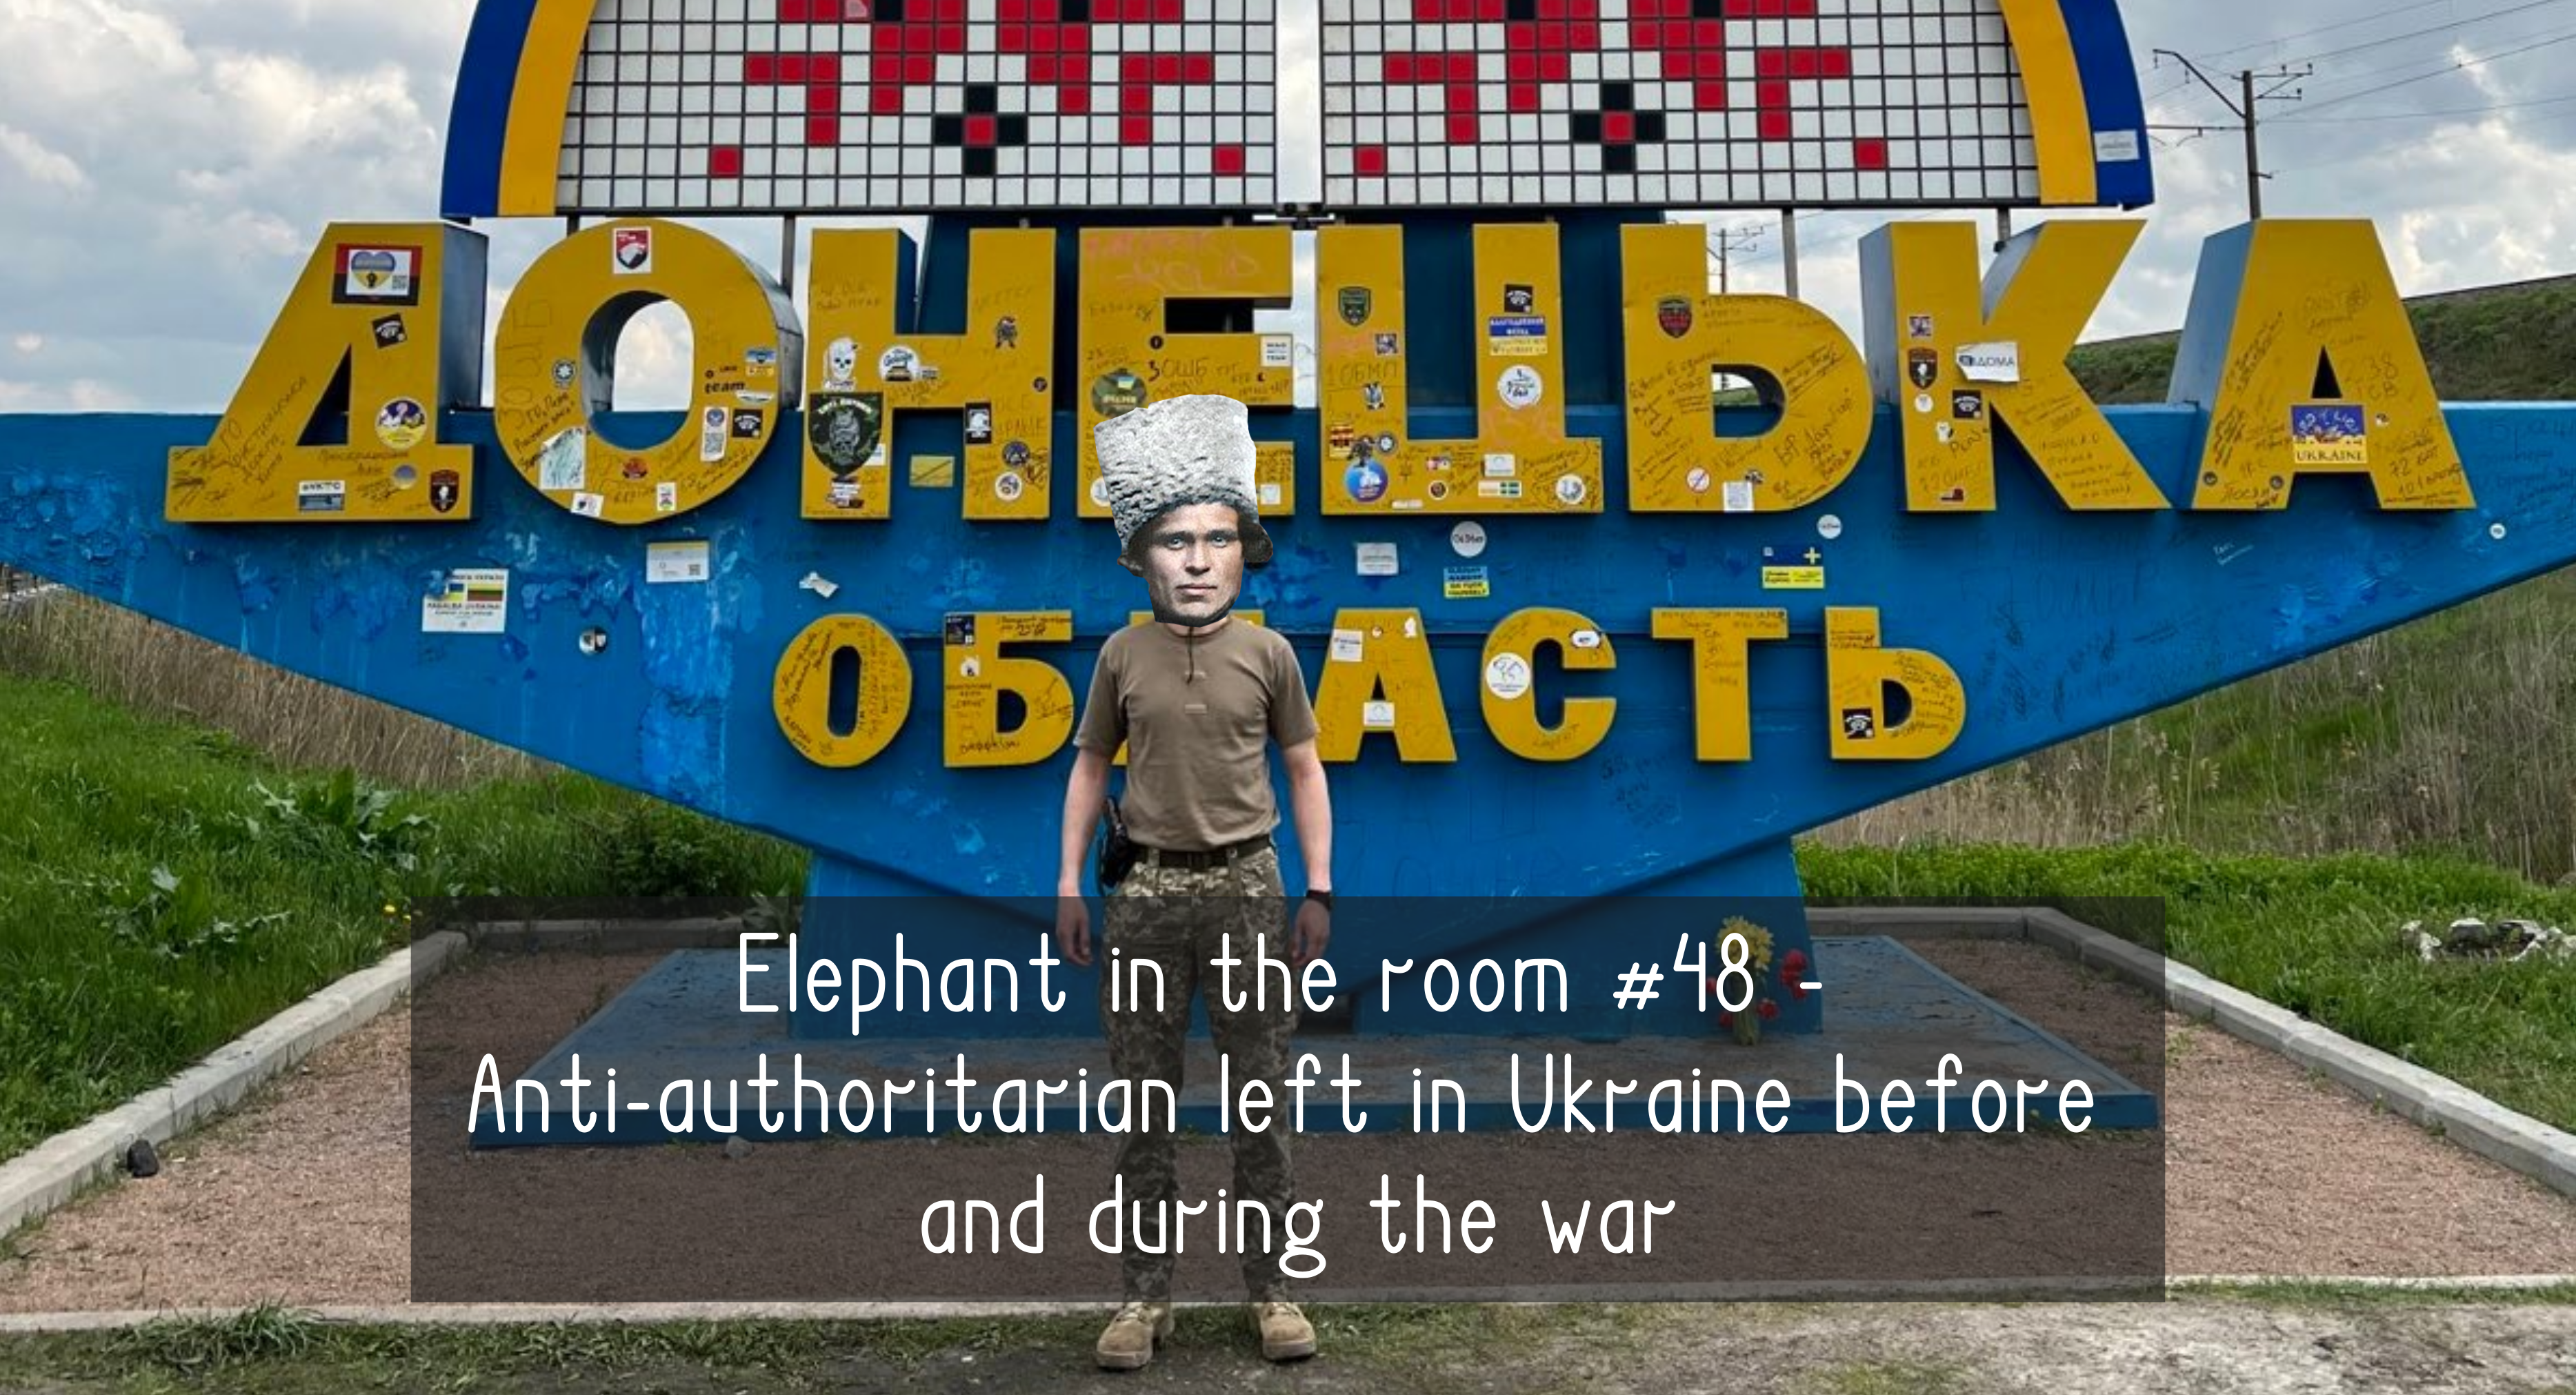 Elephant in the room #48 – Anti-authoritarian left in Ukraine before and during the war